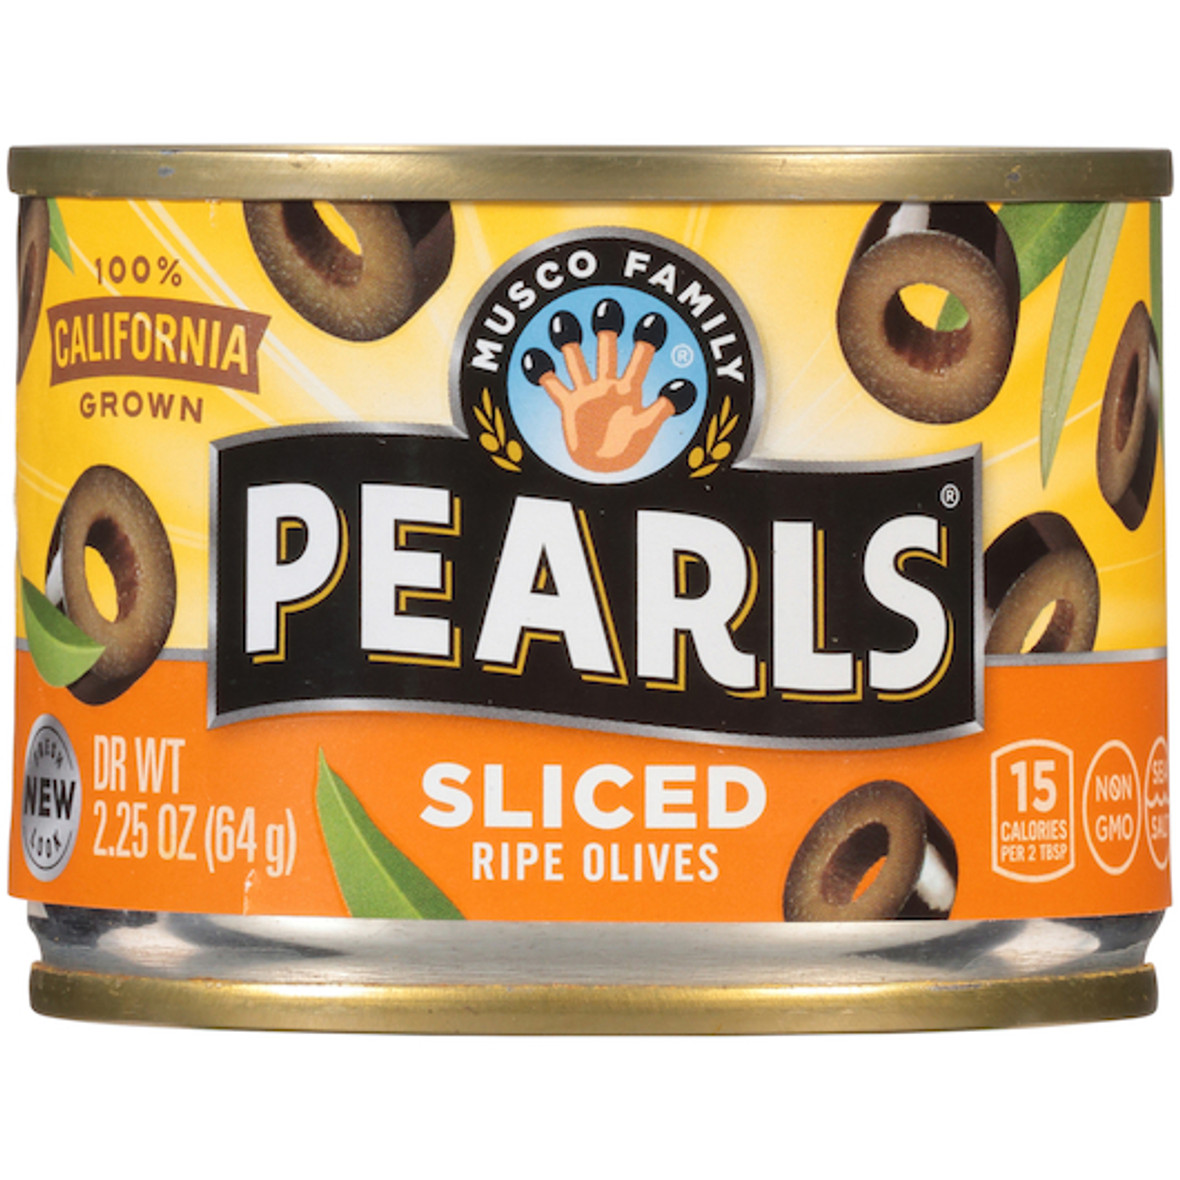 Pearls Sliced Black Ripe Olives Canned, 2.25 Ounce, 12 Per Case